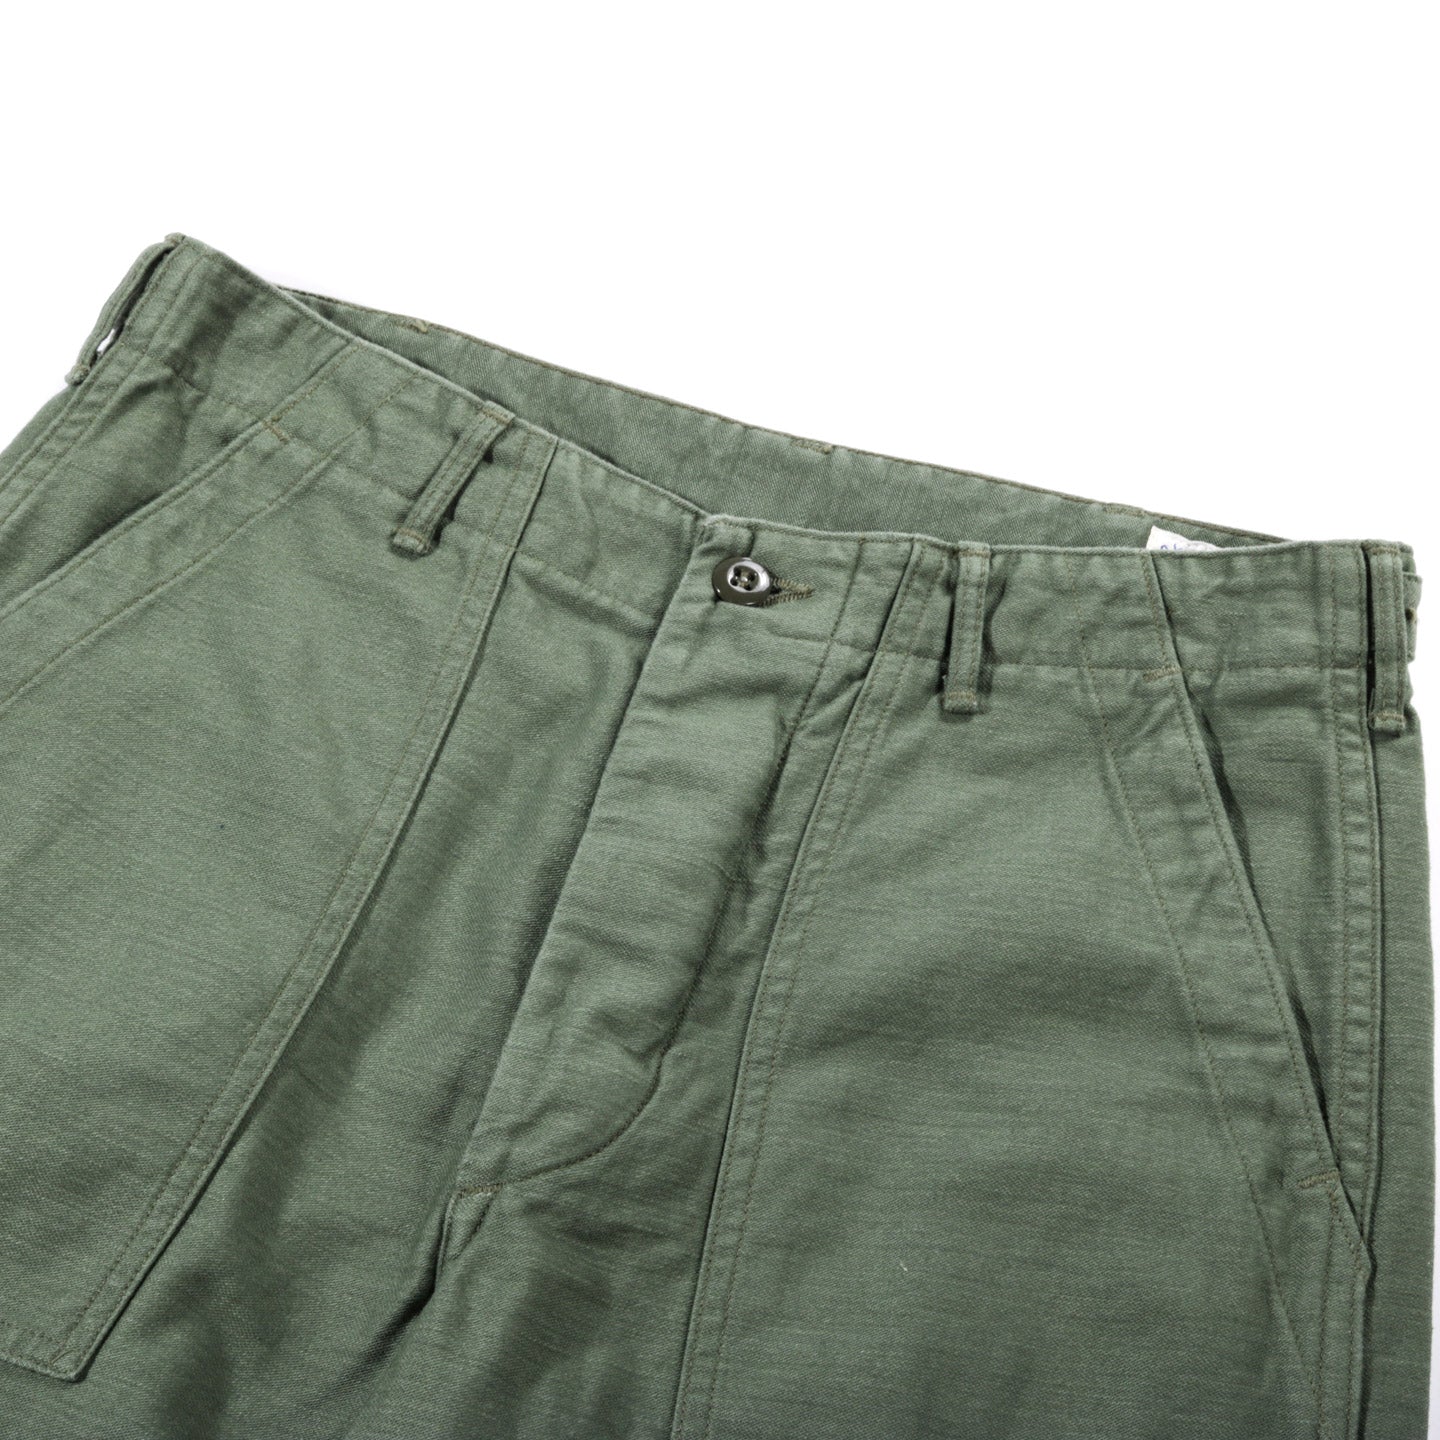 ORSLOW US ARMY FATIGUE PANTS GREEN REVERSE SATEEN